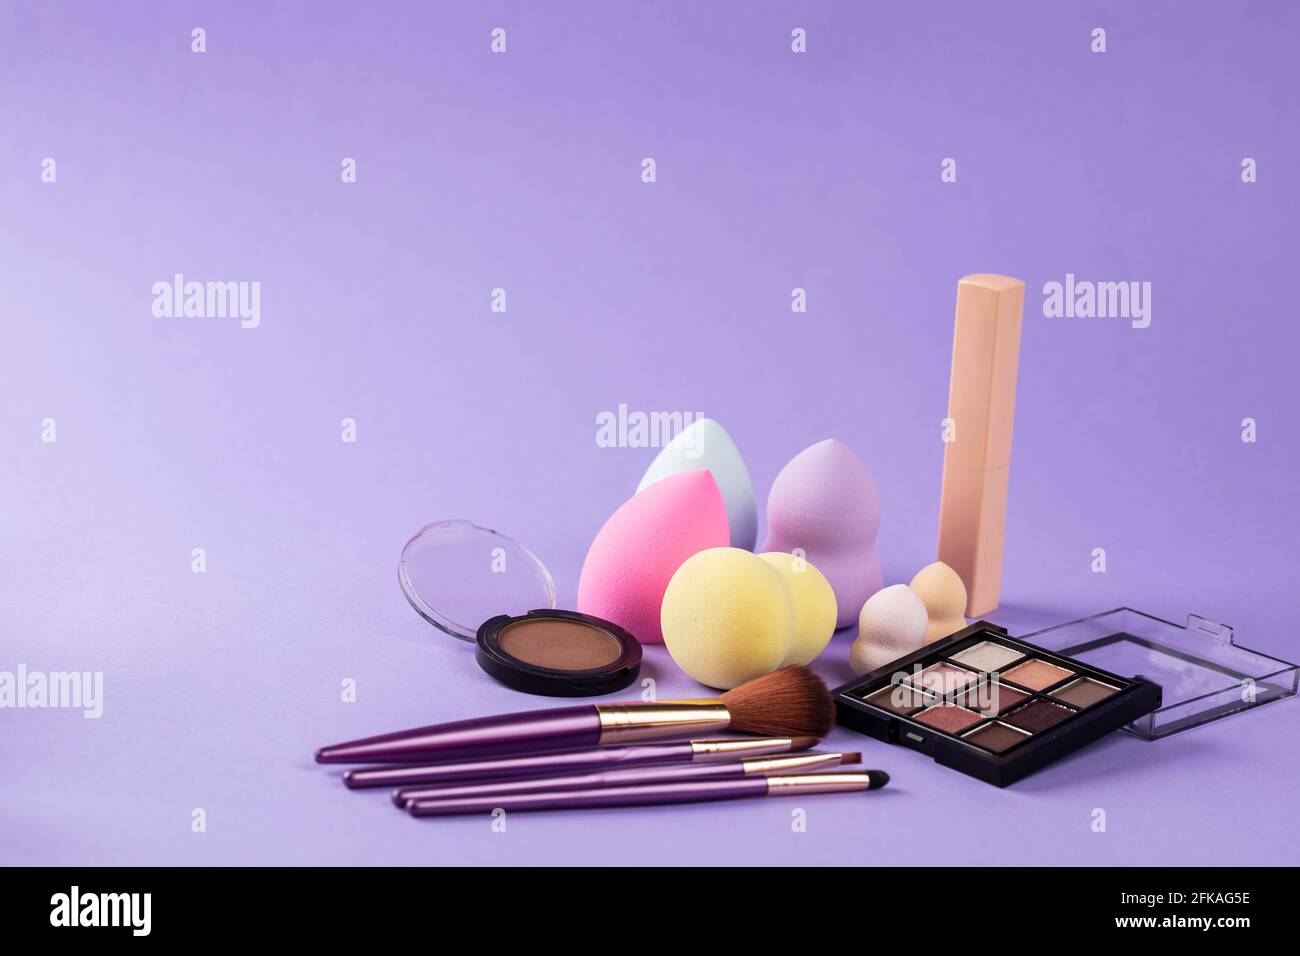 different colors of beauty blender, blush, eyeshadow and make up brushes Stock Photo